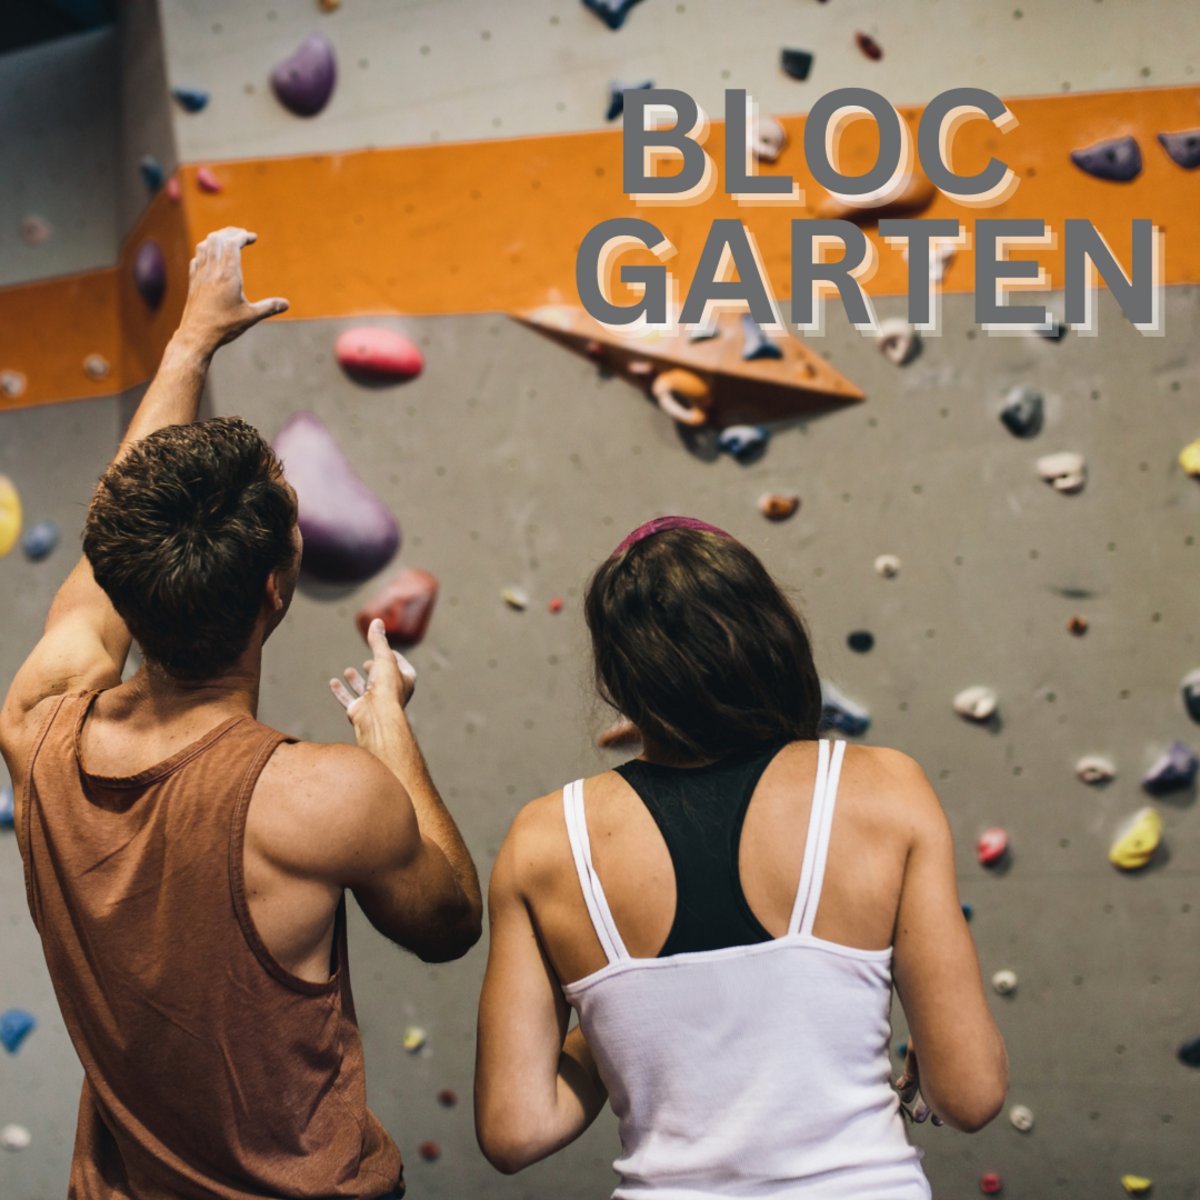 If you're planning a trip to #Columbus, don't miss the chance to visit #BlocGarten! It's a fantastic indoor #rockclimbinggym that promises a fun-filled day. You can buy a day pass for under $25! For further details, check out their website at bit.ly/3WfNq1c.